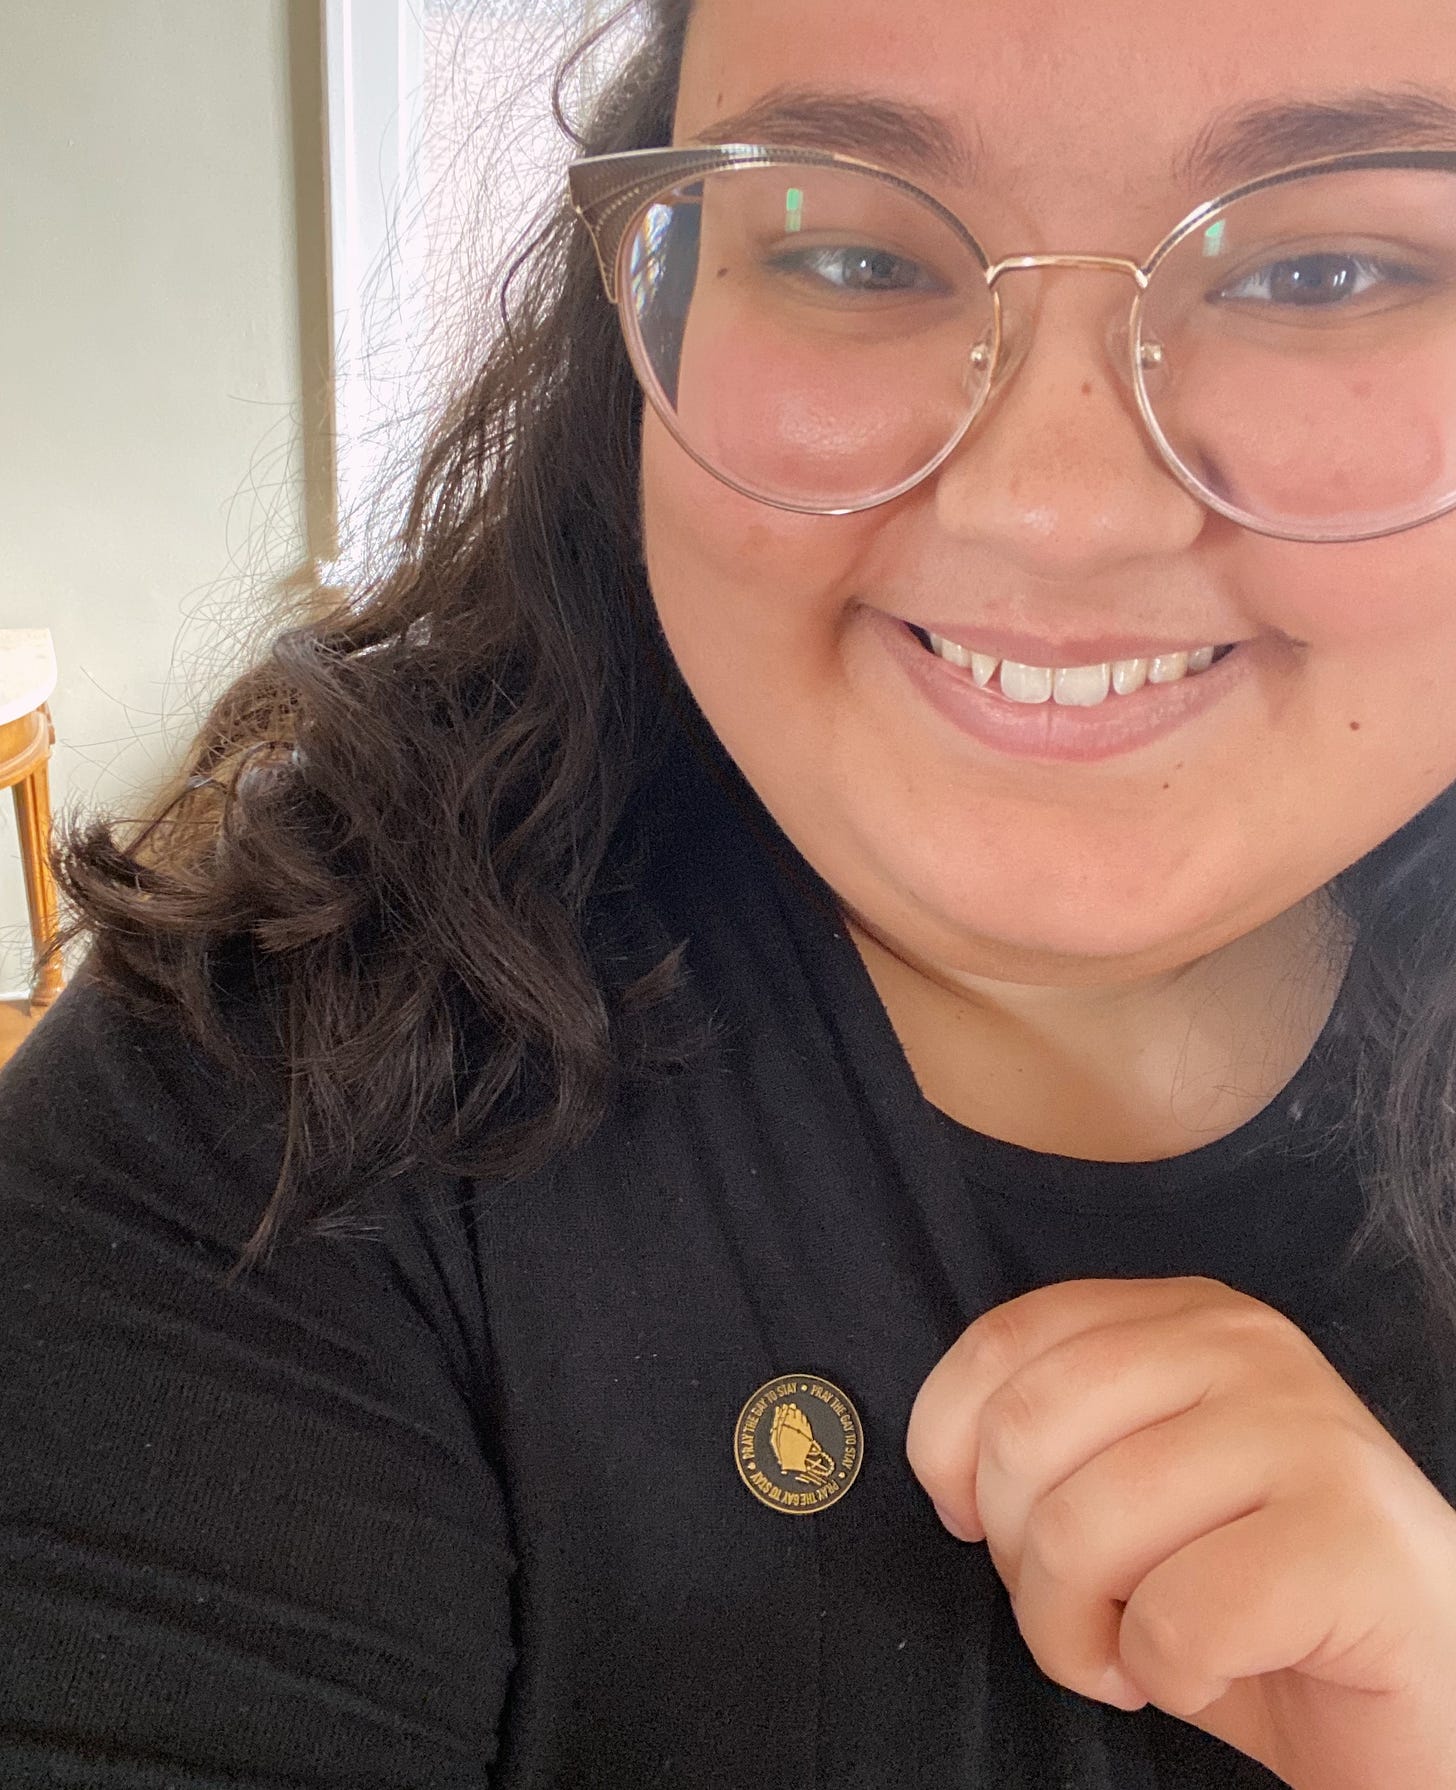  Chloe is smiling into the camera in this close-up shot where she is showing off her lapel pin which is black with gold accents. The lapel pin features hands folded in prayer and holding rosary beads in the center of the design. Around the hands are the words “pray the gay to stay”, which is printed 3 times around the edges of the pin. 